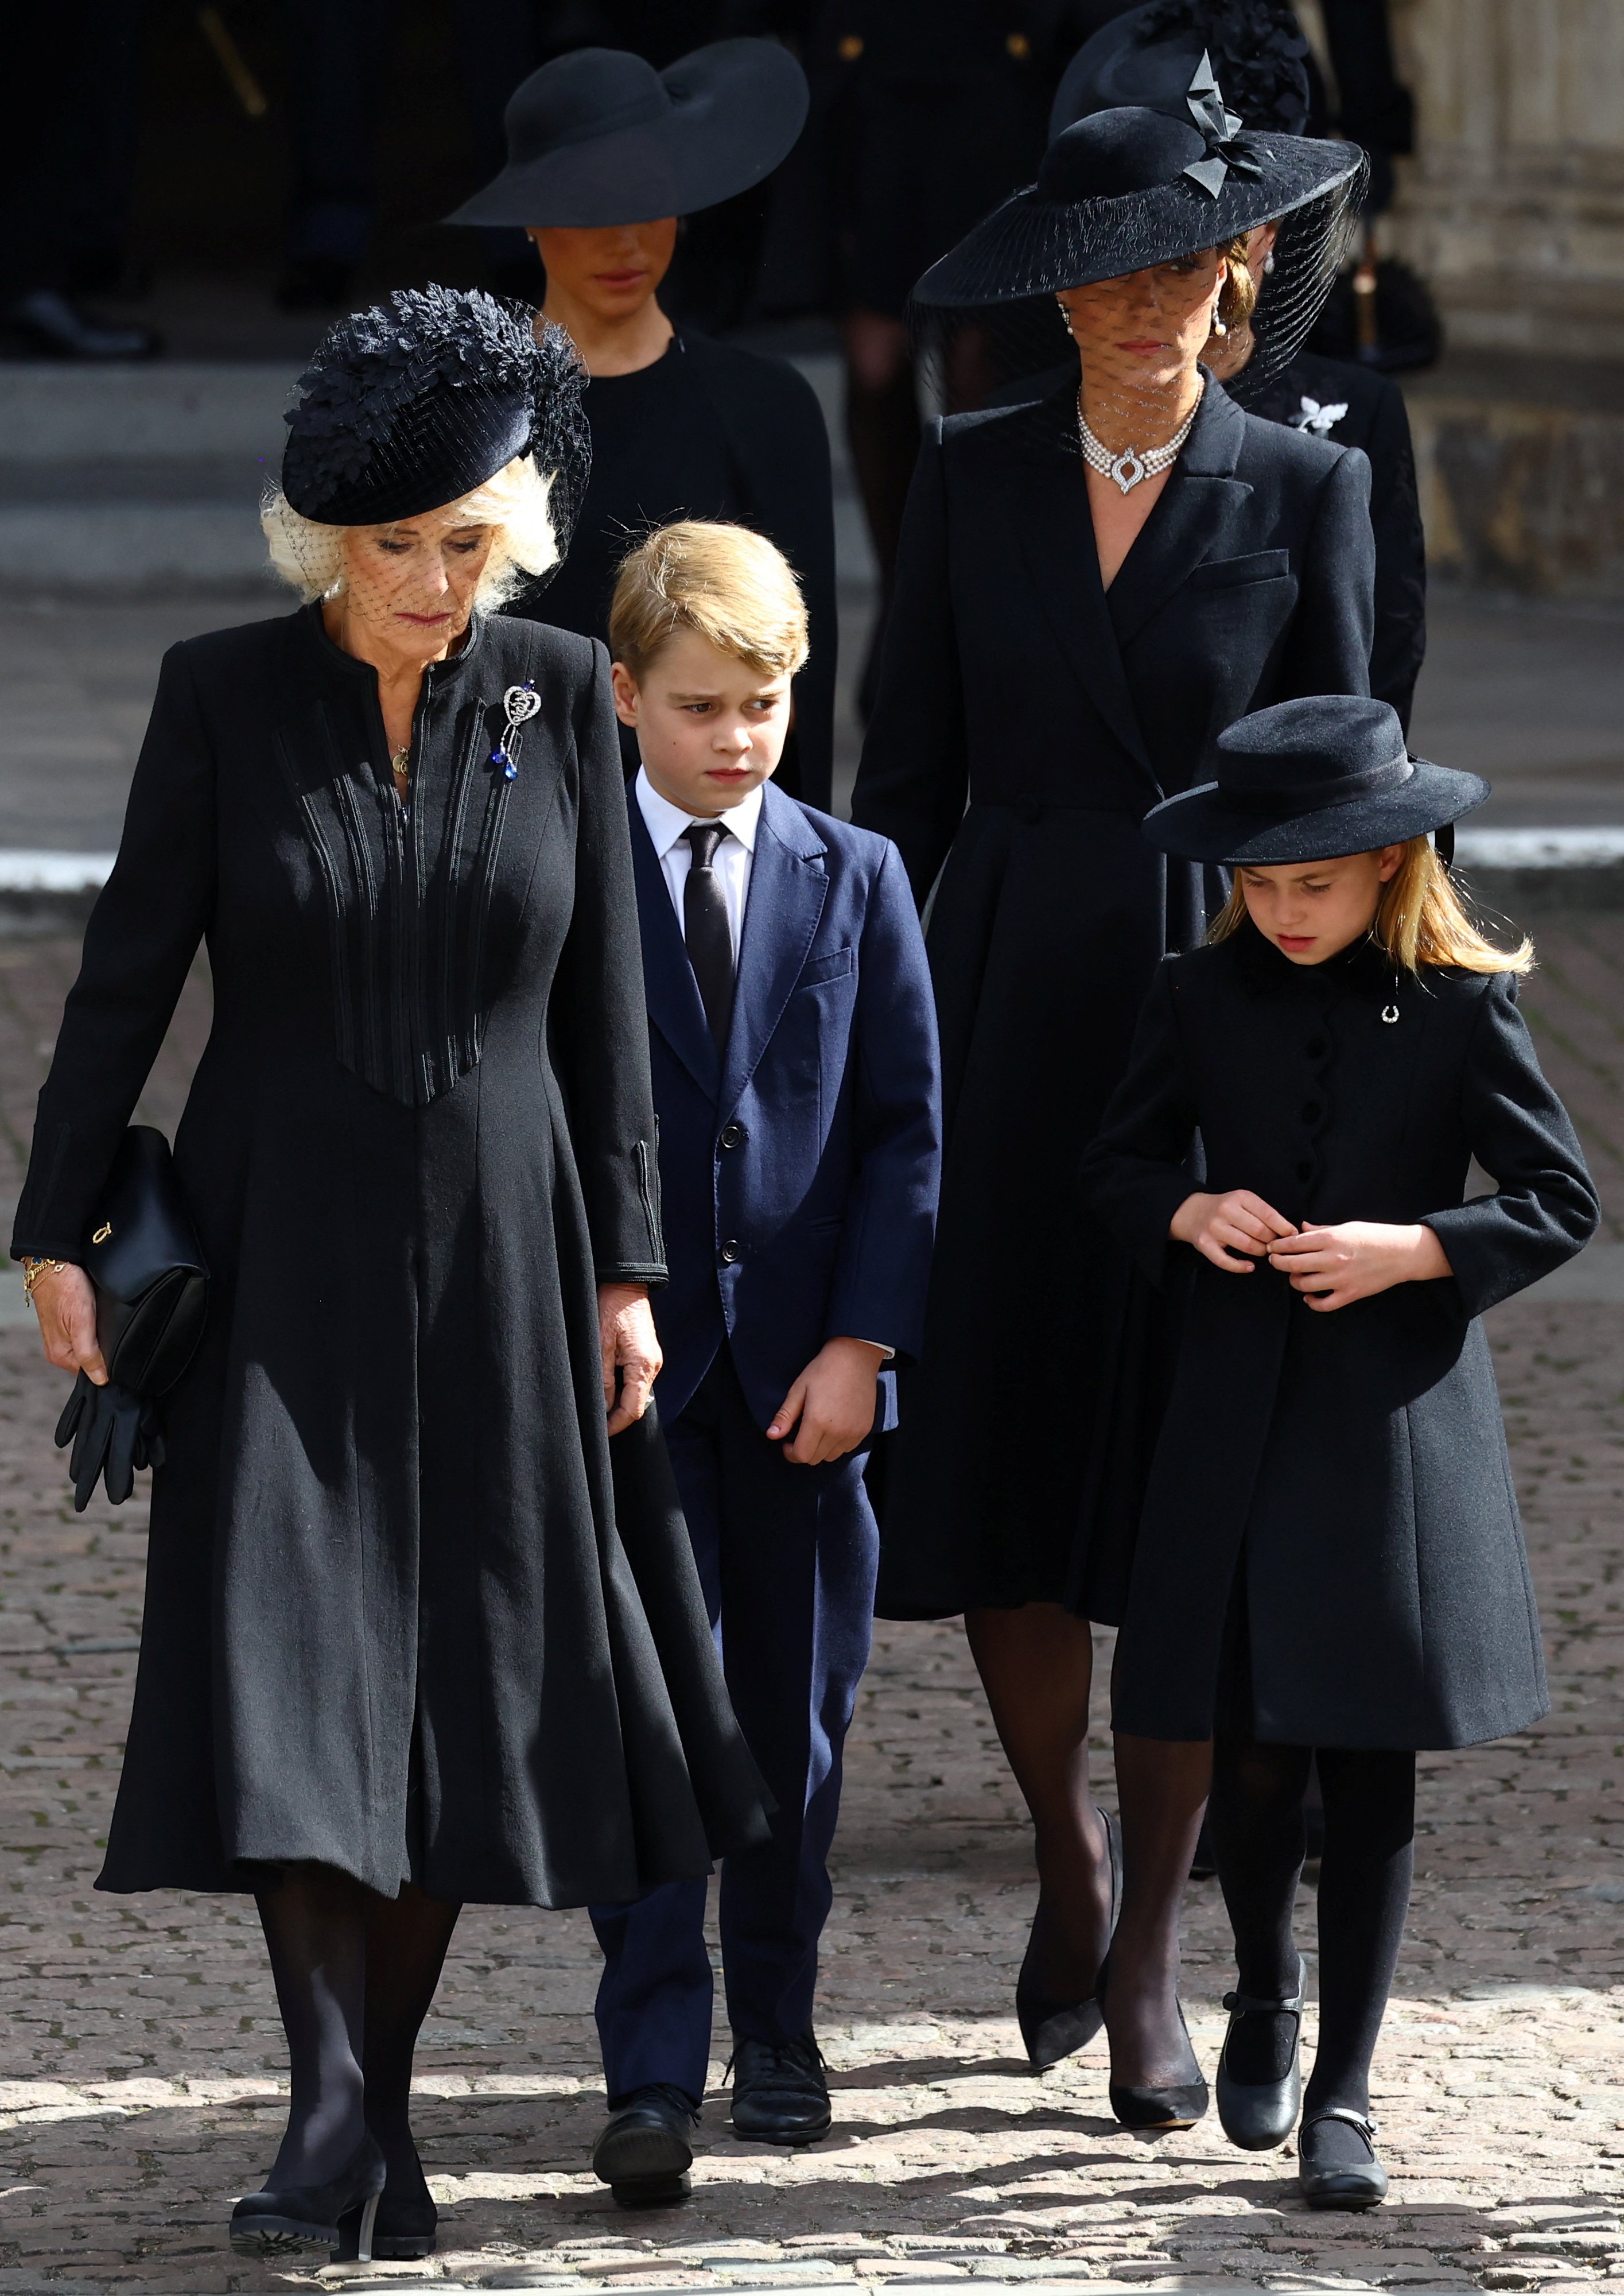 Queen Consort Camilla, Kate Middleton, Prinz George, Prinzessin Charlotte und Meghan Markle in London 2022 | Quelle: Getty Images  